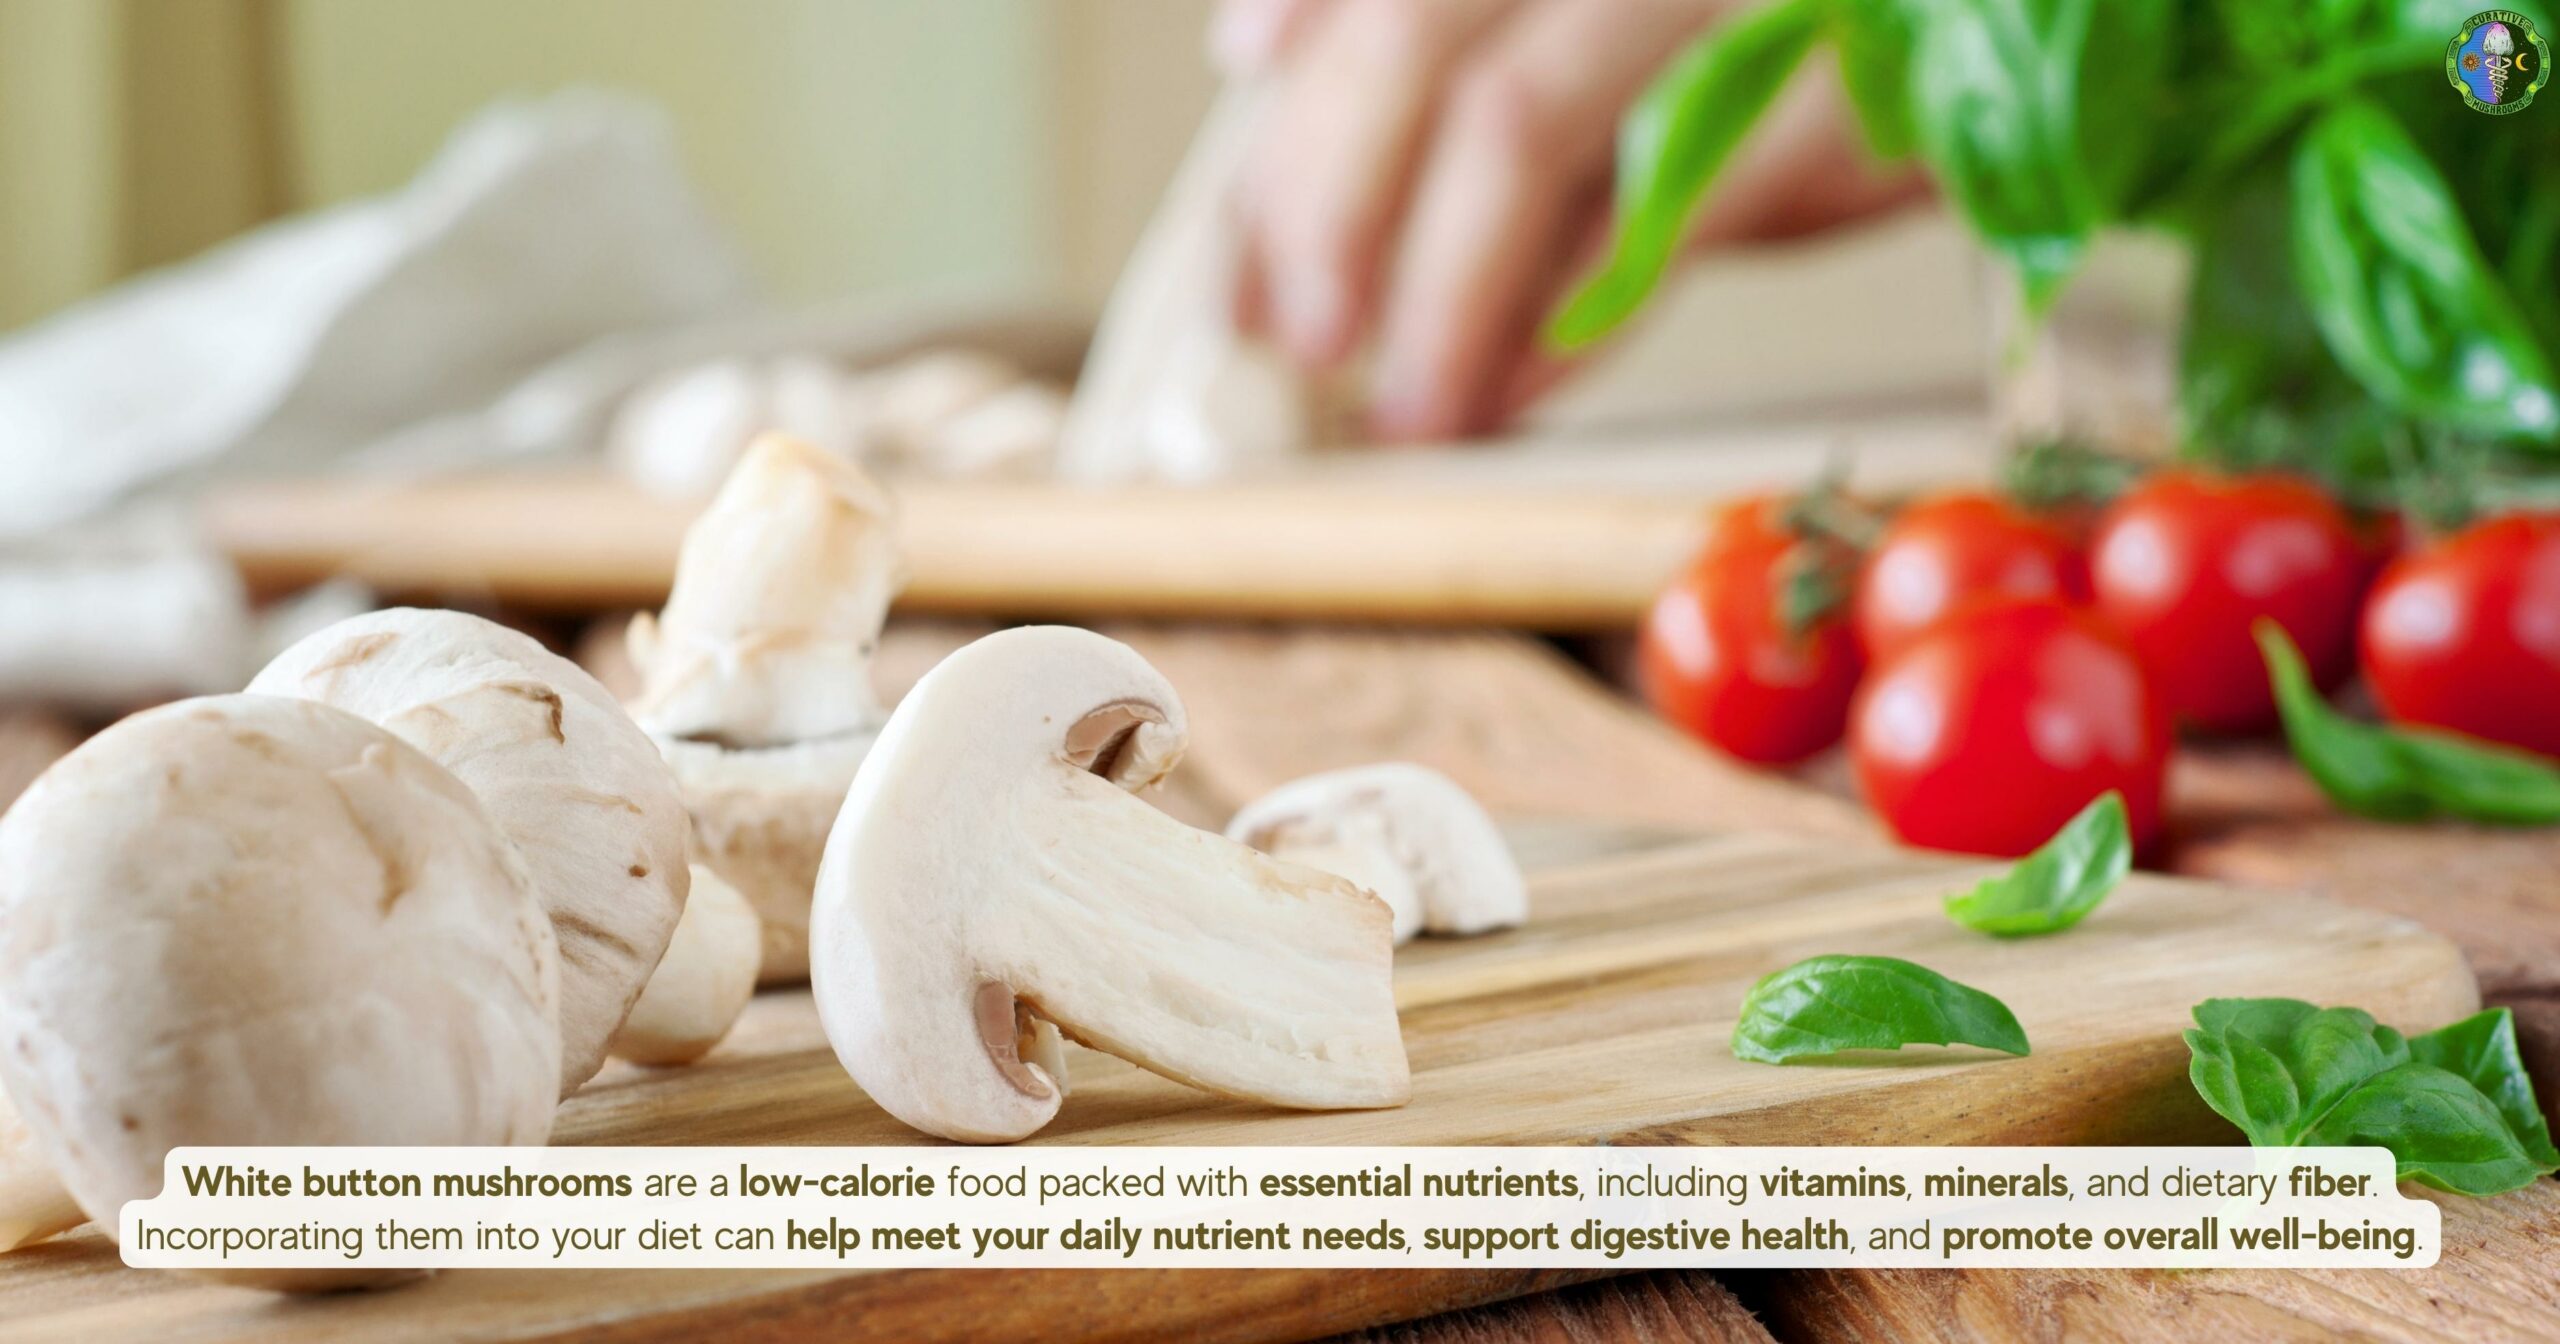 White Button Mushrooms Nutritional Profile - low-calorie, essential nutrients, vitamins, minerals, fiber - help meet daily nutrient needs, support digestive health, promote overall well-being